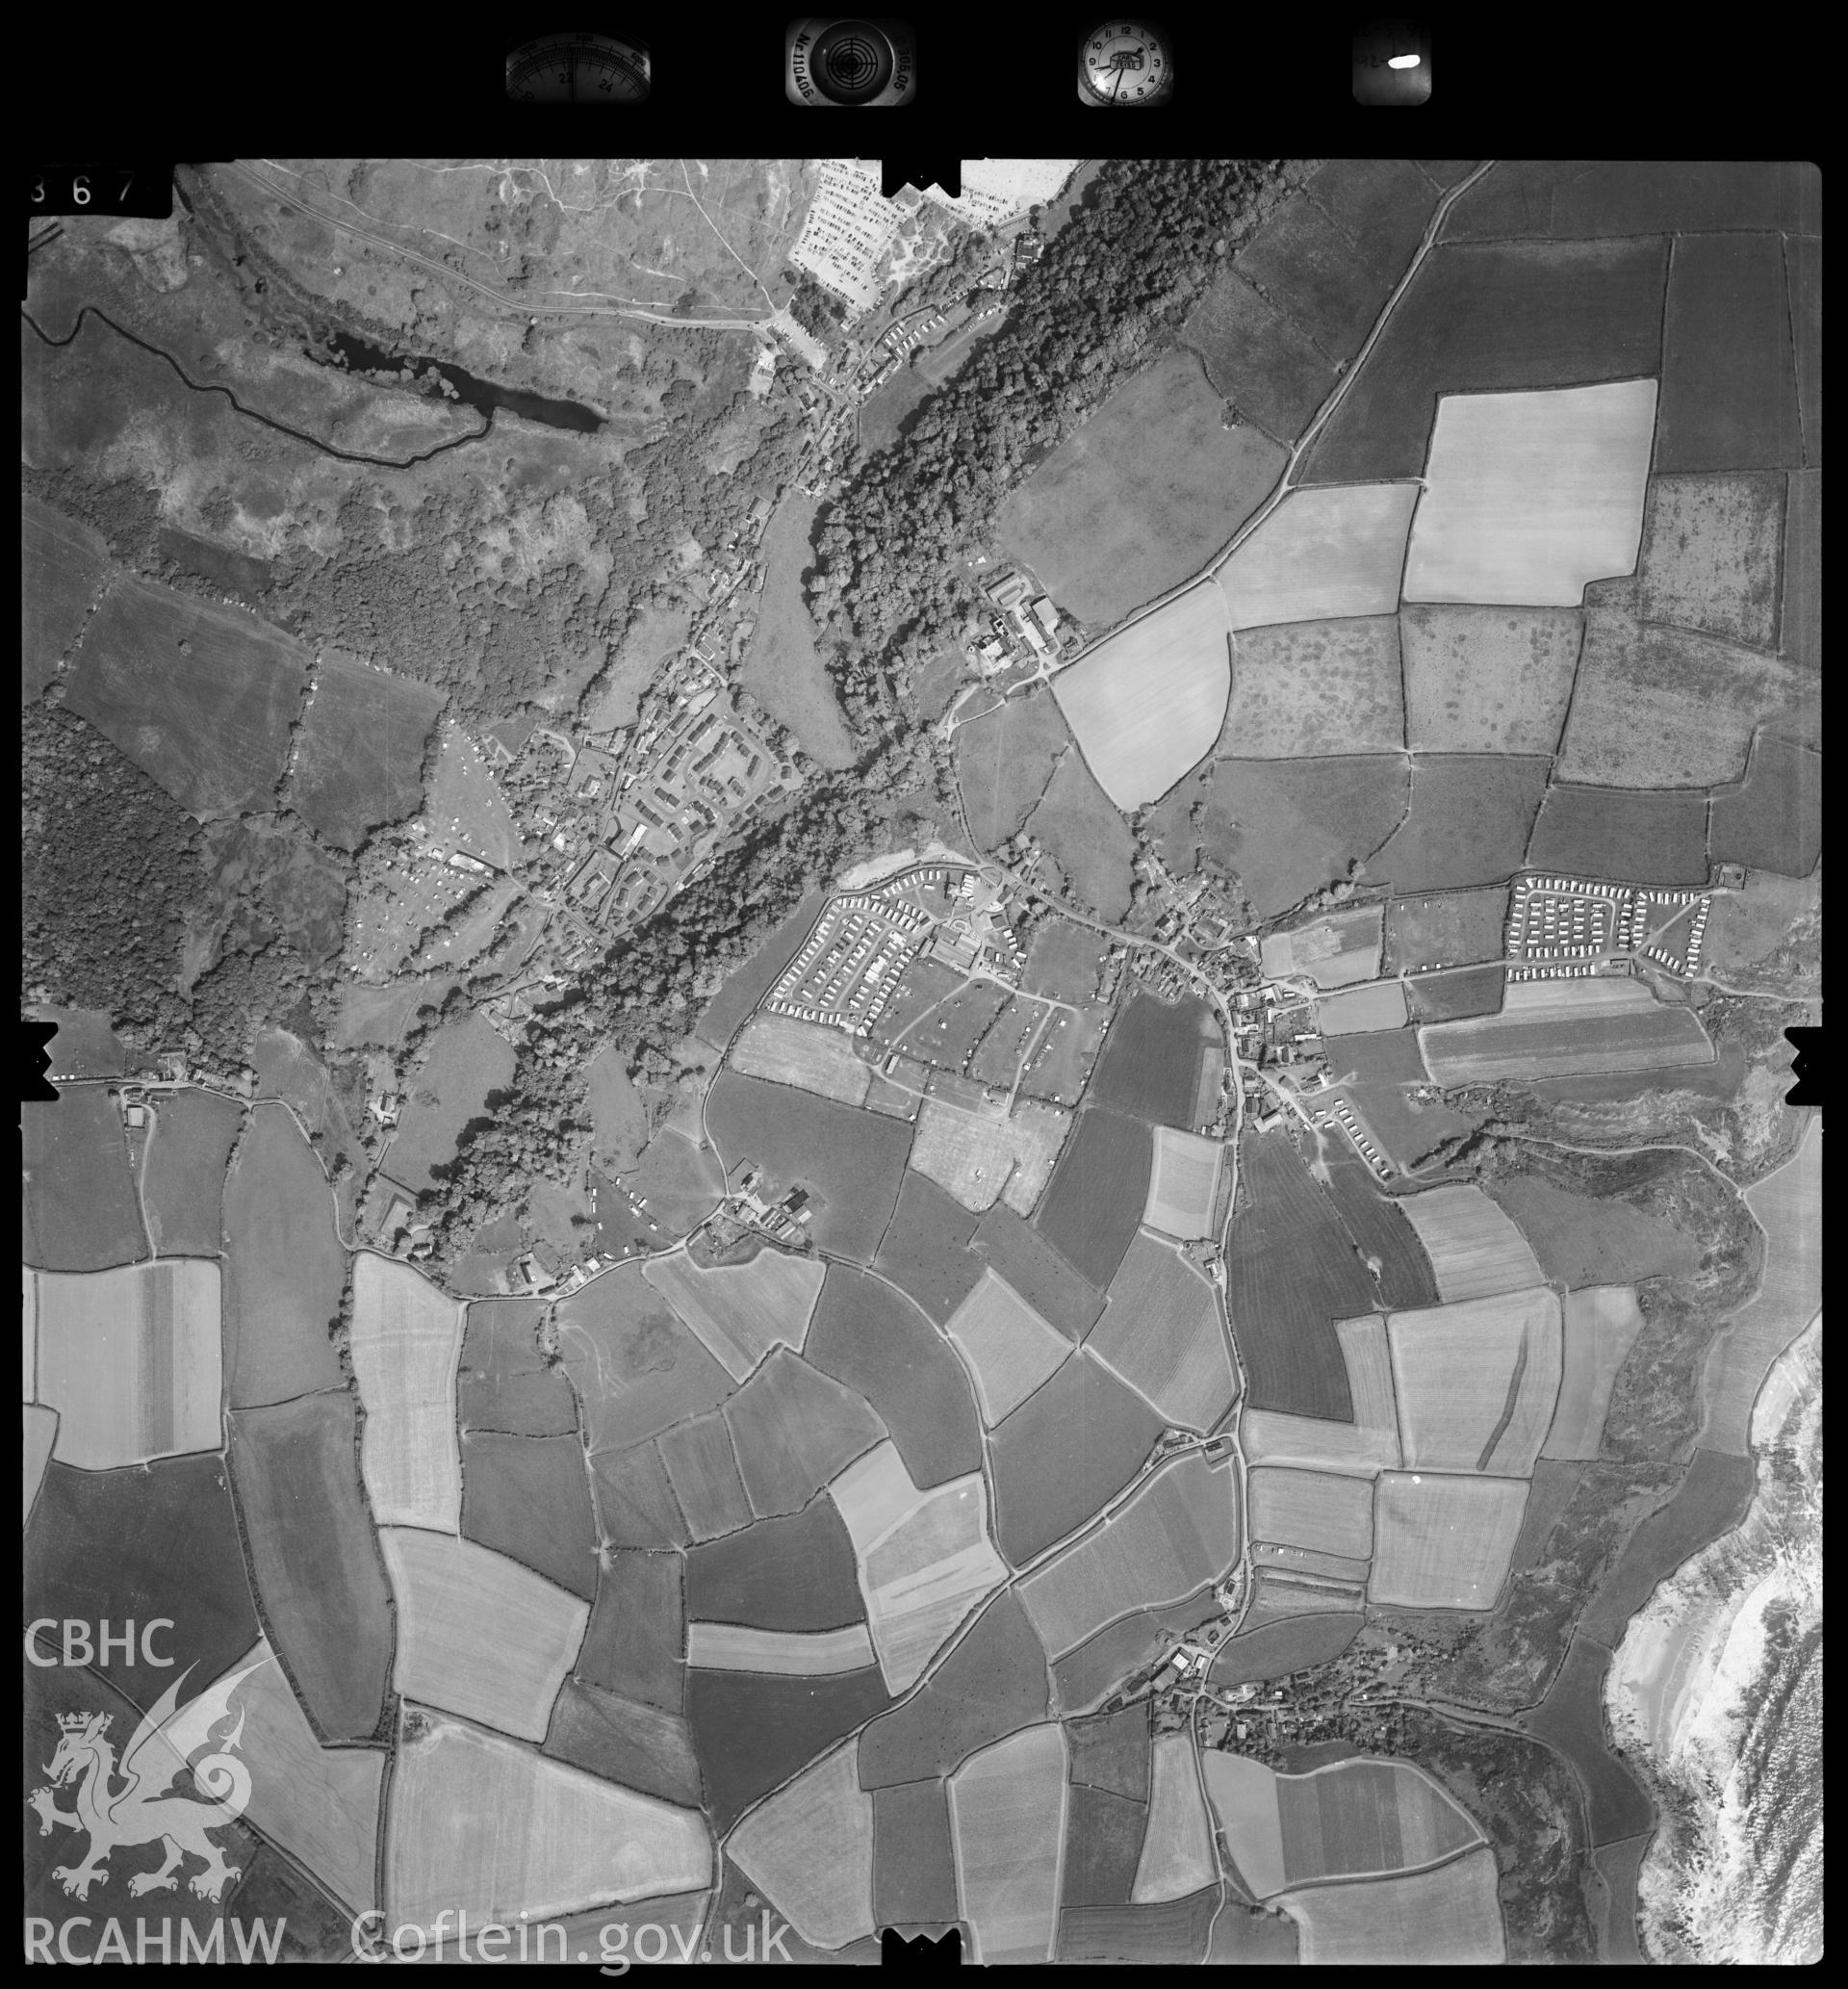 Digitized copy of an aerial photograph showing Oxwich Green area, Gower, taken by Ordnance Survey, 1992.